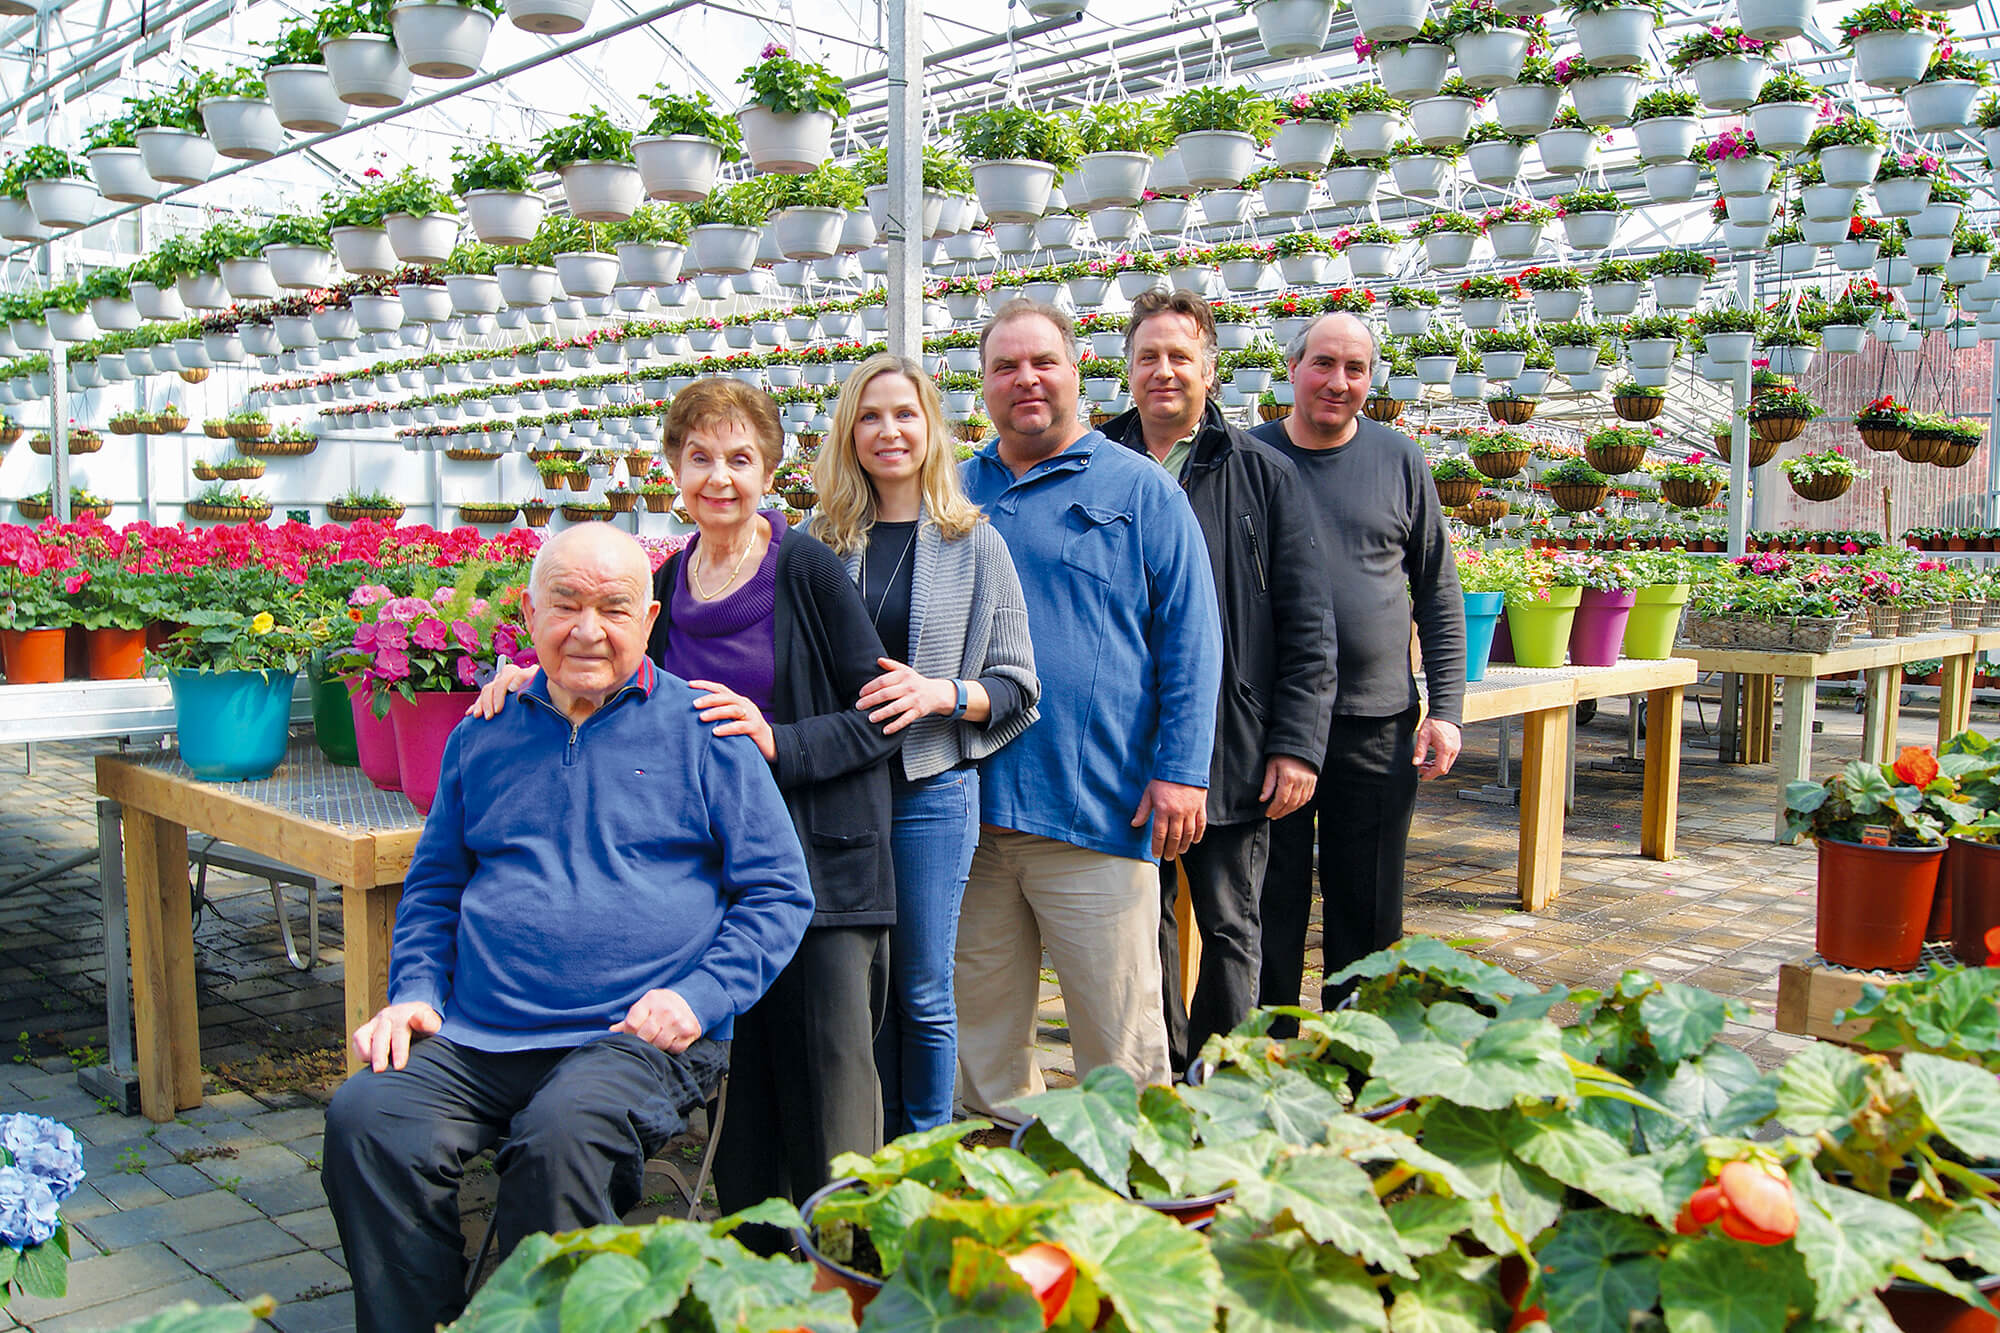 family all togehter in a greenhouse full of colourful plants